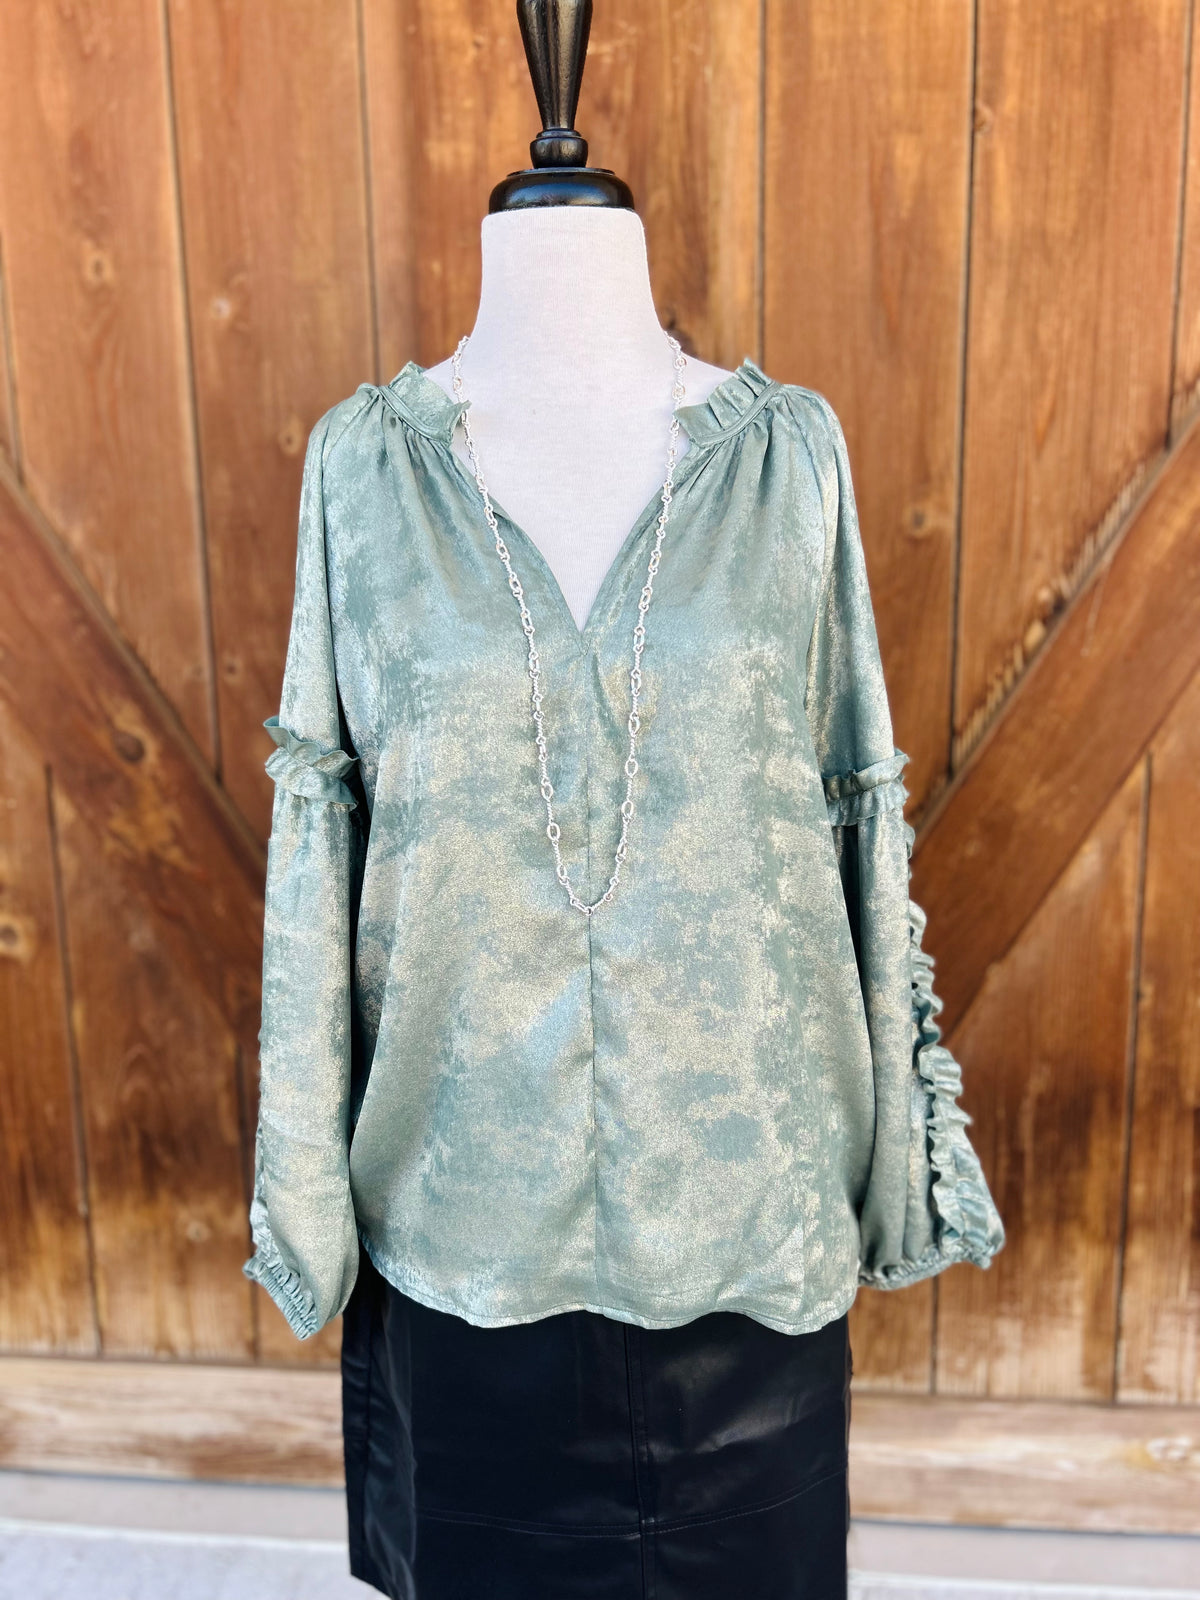 Ivy Jane / Uncle Frank Metallic Ruffled Top Top - The Attic Boutique